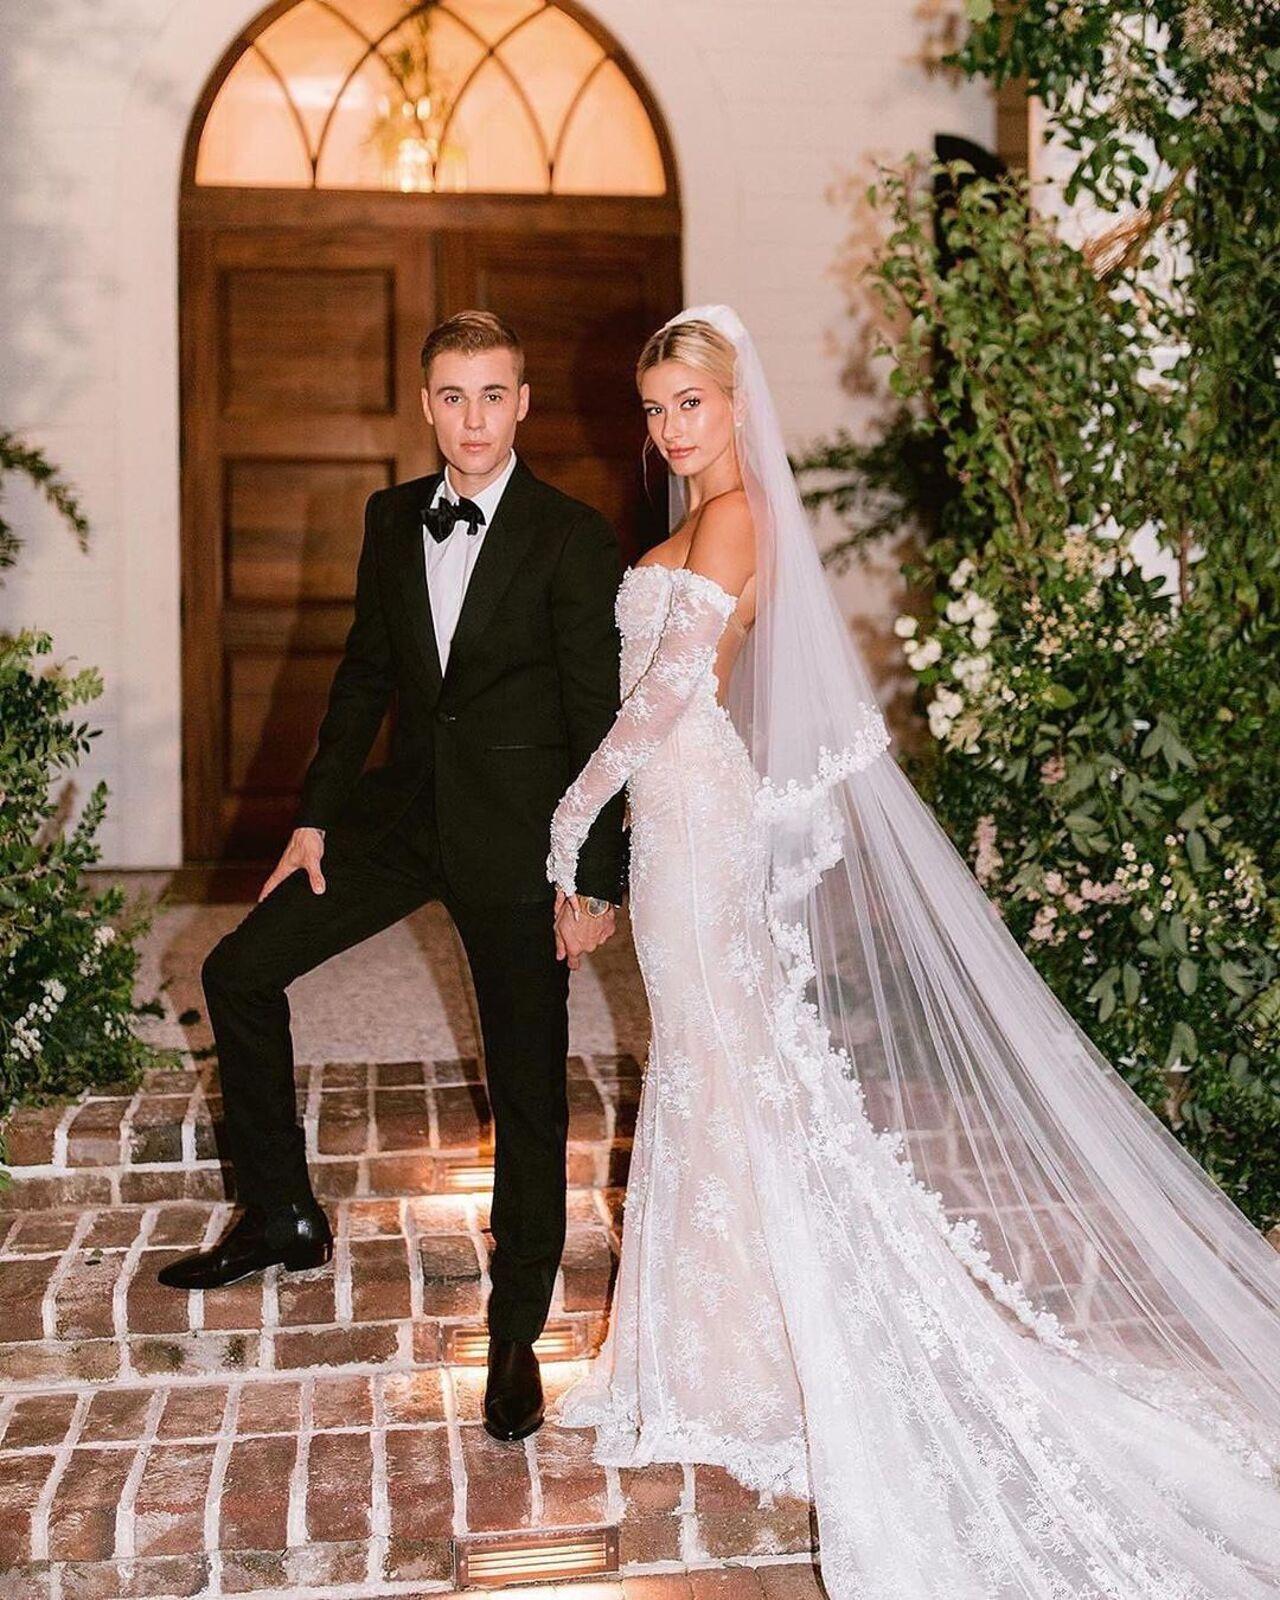 Justin and Hailey Bieber walked down the aisle in 2019 at the Montage Palmetto Bluff Hotel in South Carolina. Hailey wore a custom off-the-shoulder gown by Virgil Abloh, which featured lace and pearl embellishment, long sleeves, corseting through the bodice, and a mermaid skirt and a long tulle train embroidered with 